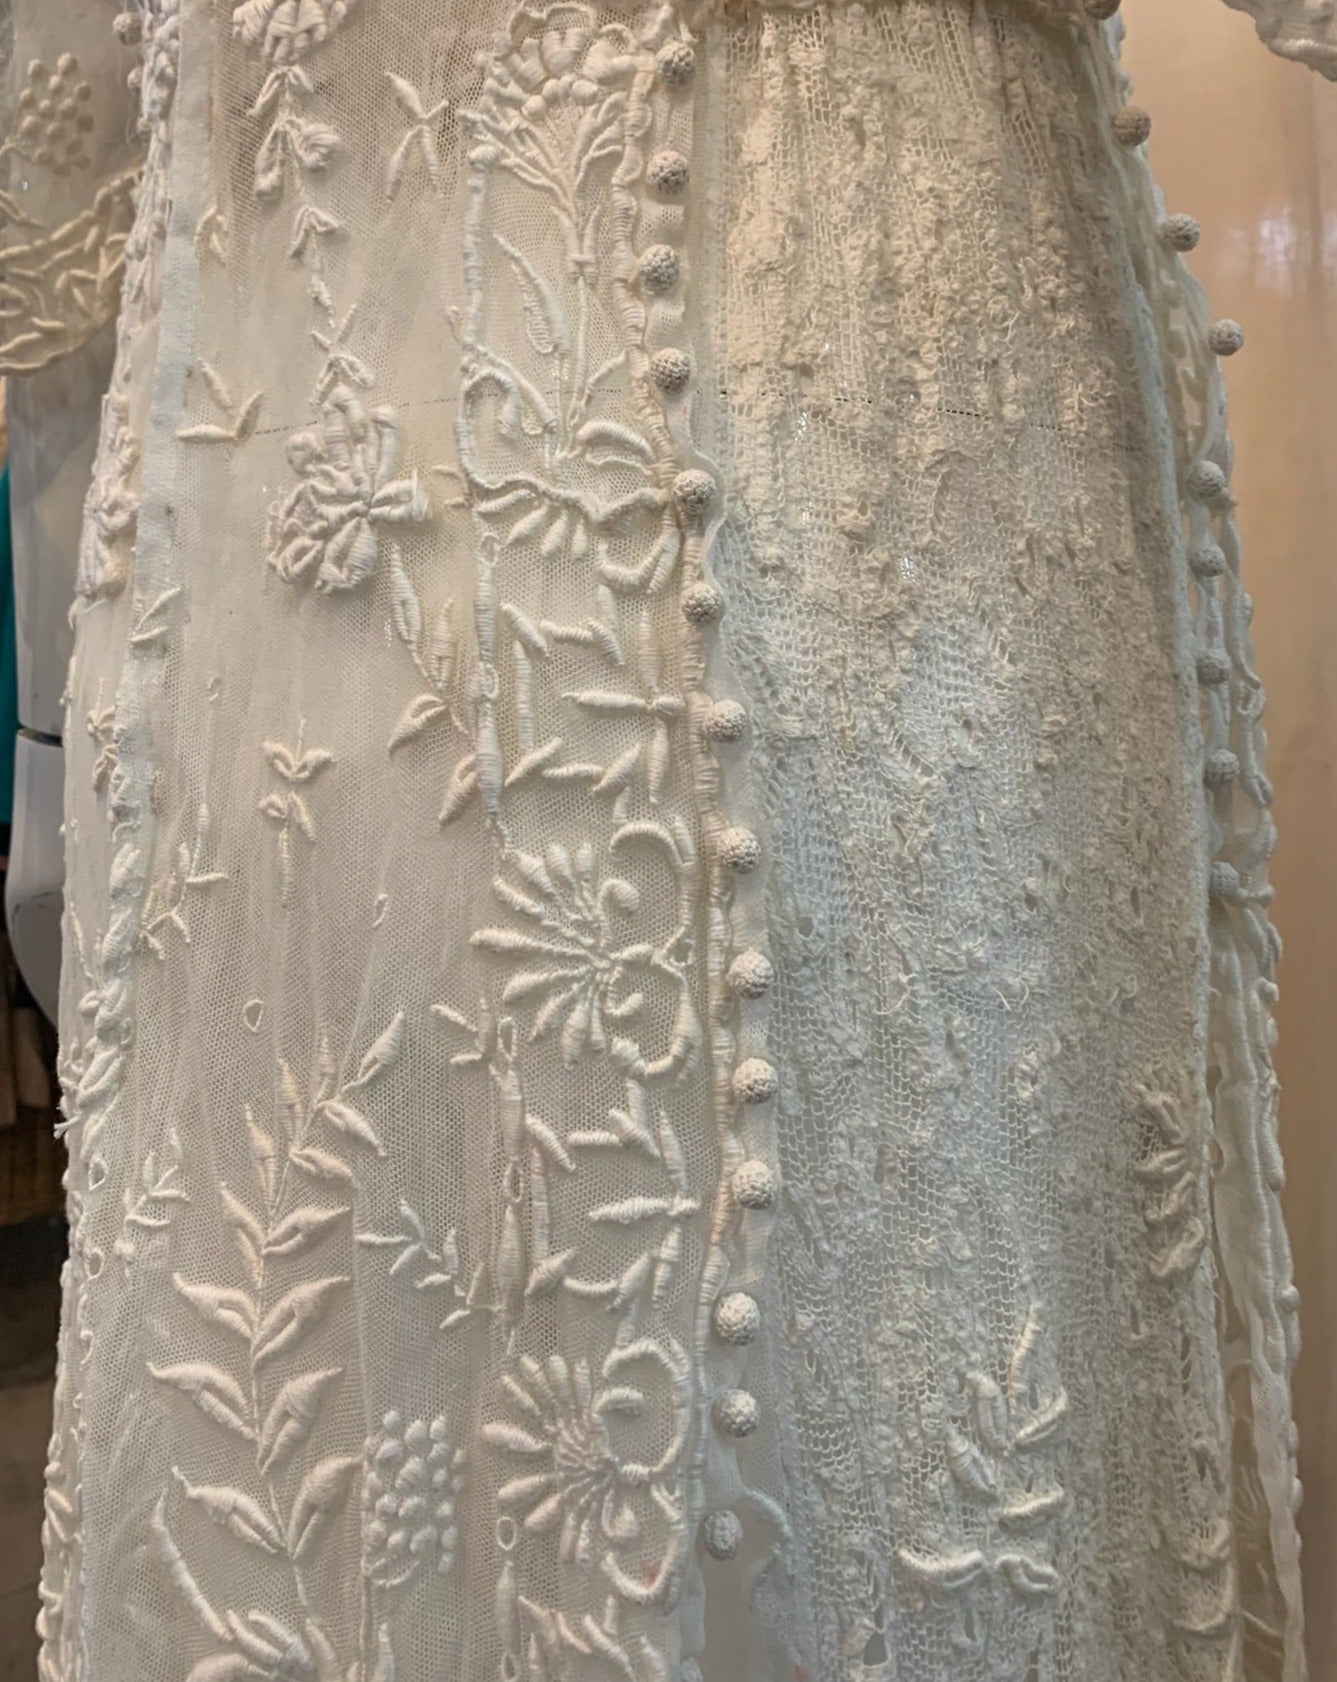  Edwardian Gown White Handmade Lace and Embroidery  FETSIL 6 of 6